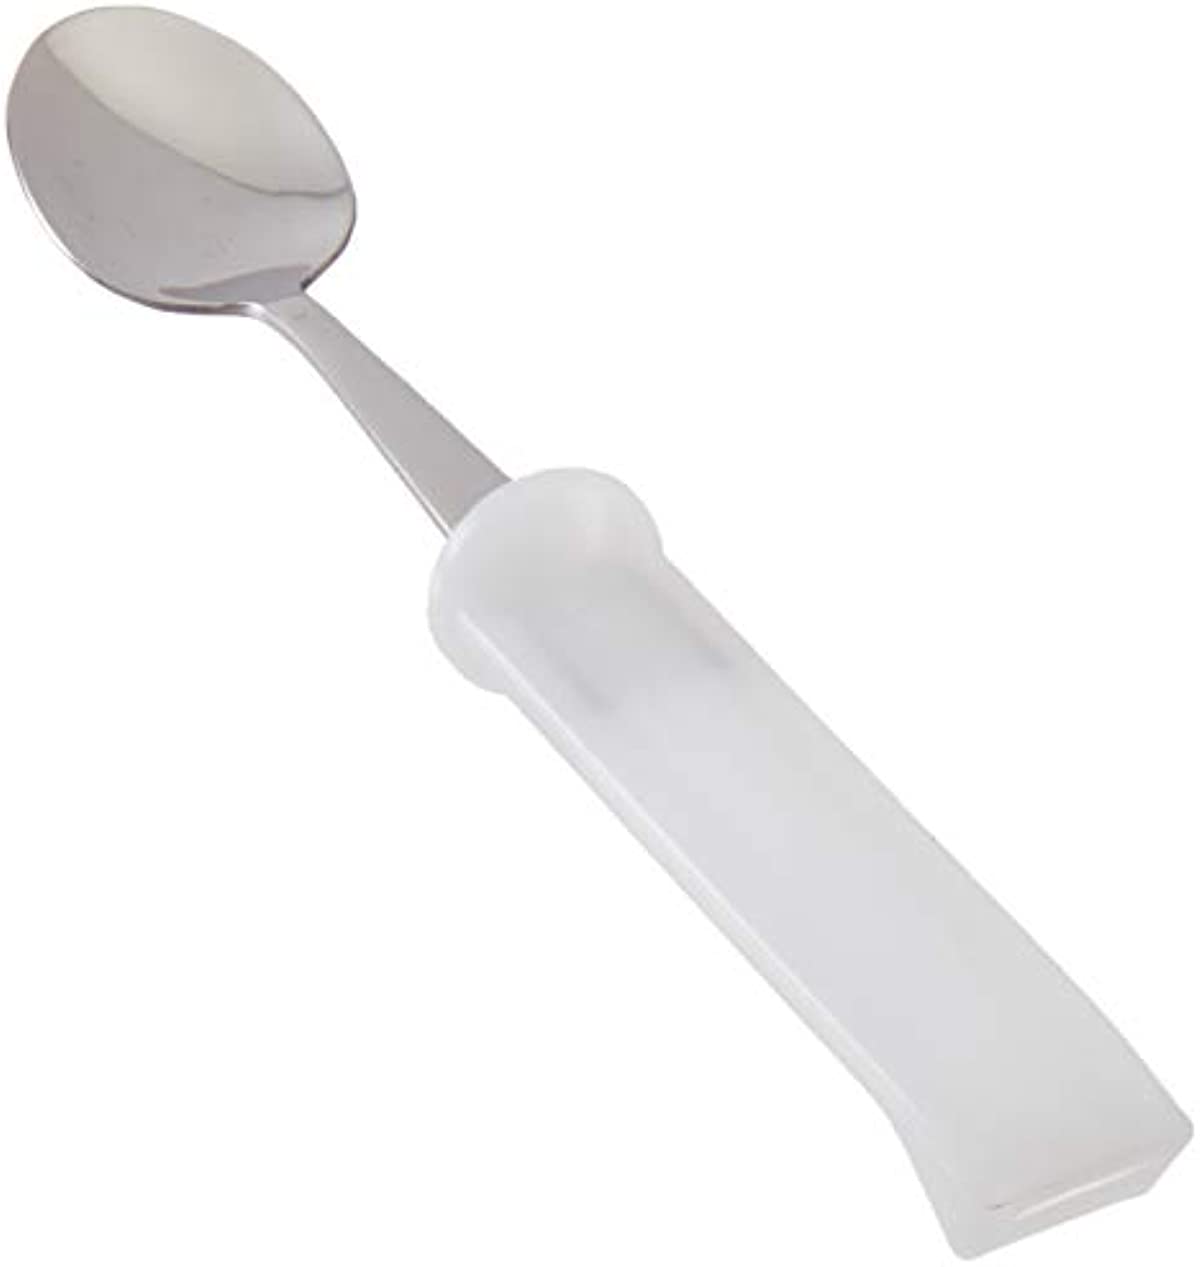 Sammons Preston Plastic-Handle Utensil, 7\" Youth Spoon with 4\" Handle Molded to Improve Grasping & Holding, Stainless Steel Pediatric & Adult Silverware, Adaptive Eating Tool & Dining Aid